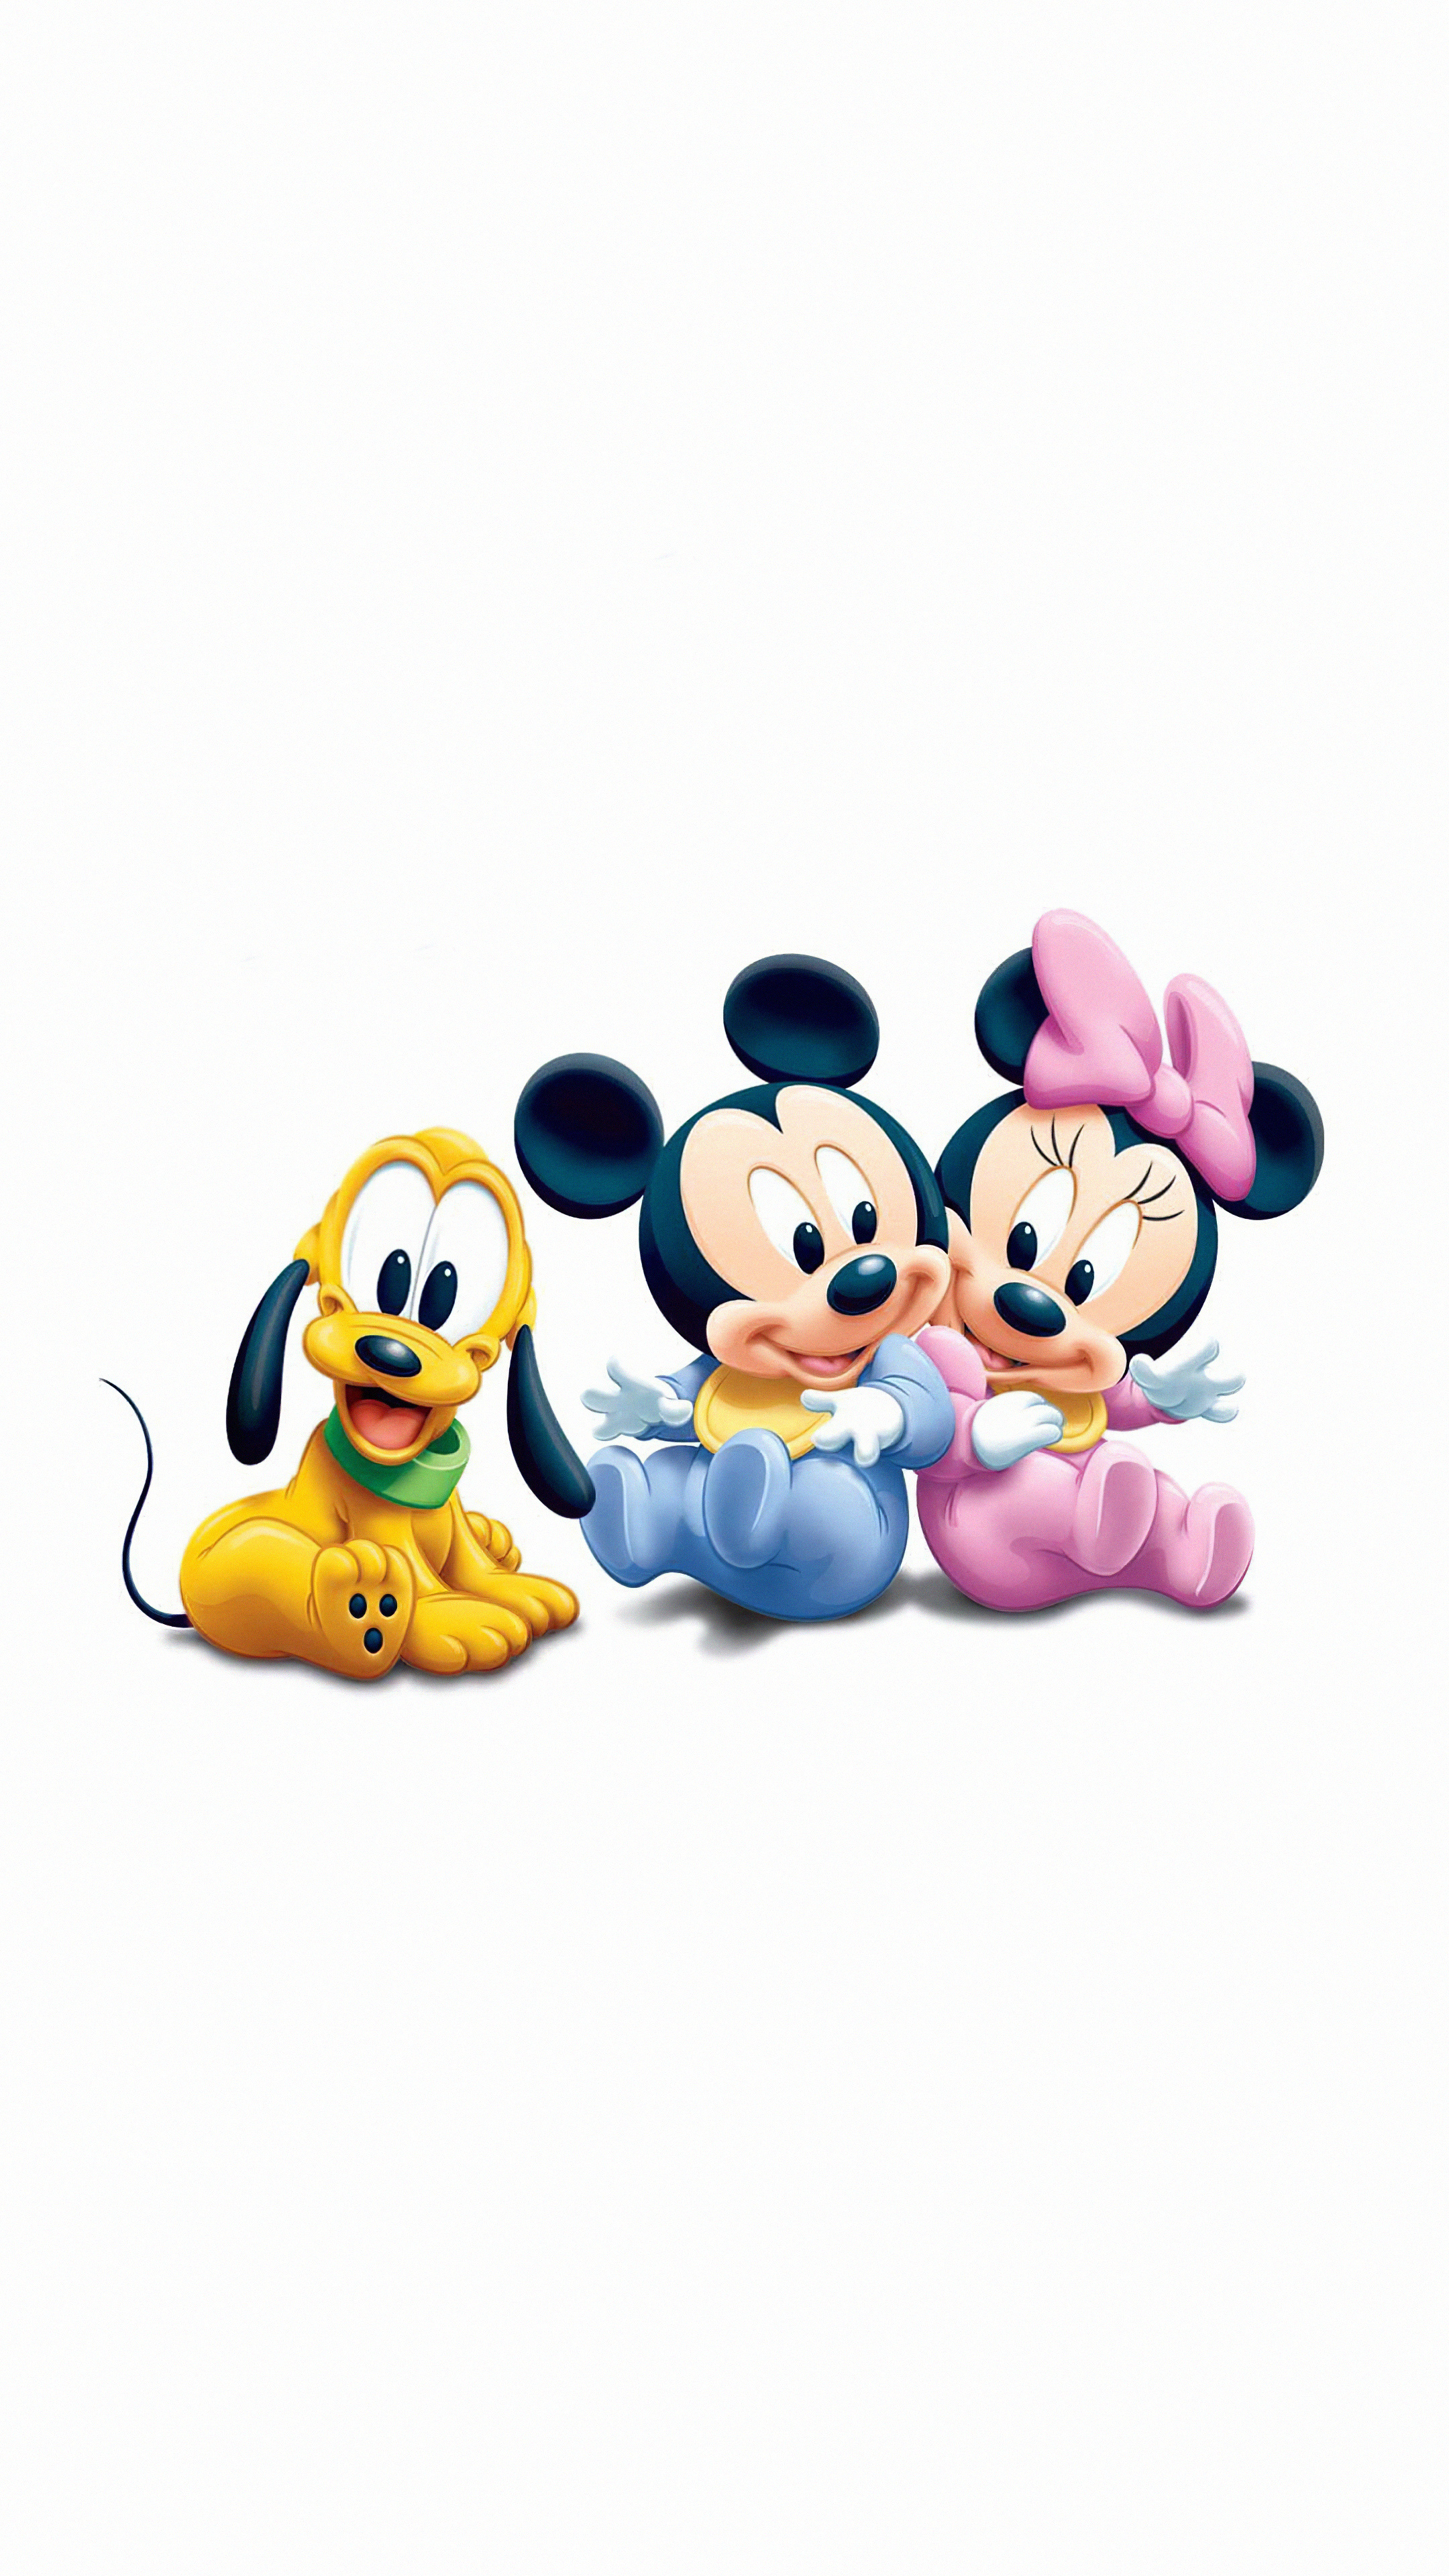 Minnie Mouse, Mickey and Goofy, Xperia wallpapers, Premium images, 2160x3840 4K Phone